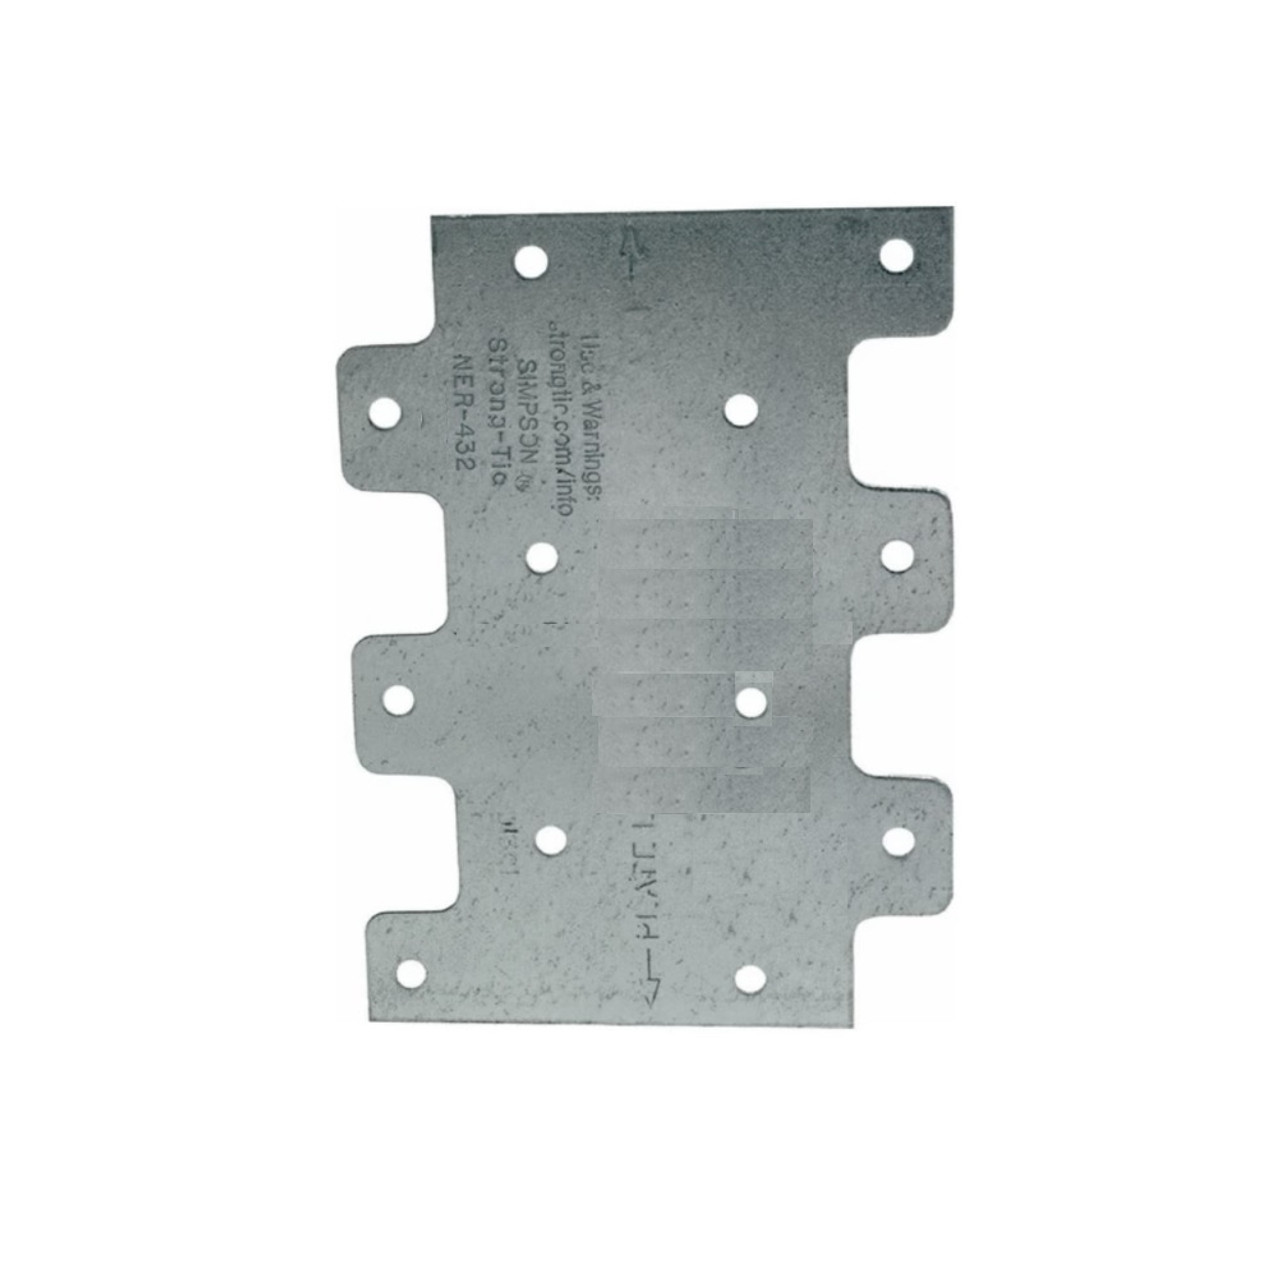 Simpson Strong-Tie LTP4Z 3 x 4-1/4-Inch Lateral Tie Plate ZMAX 200 Pk